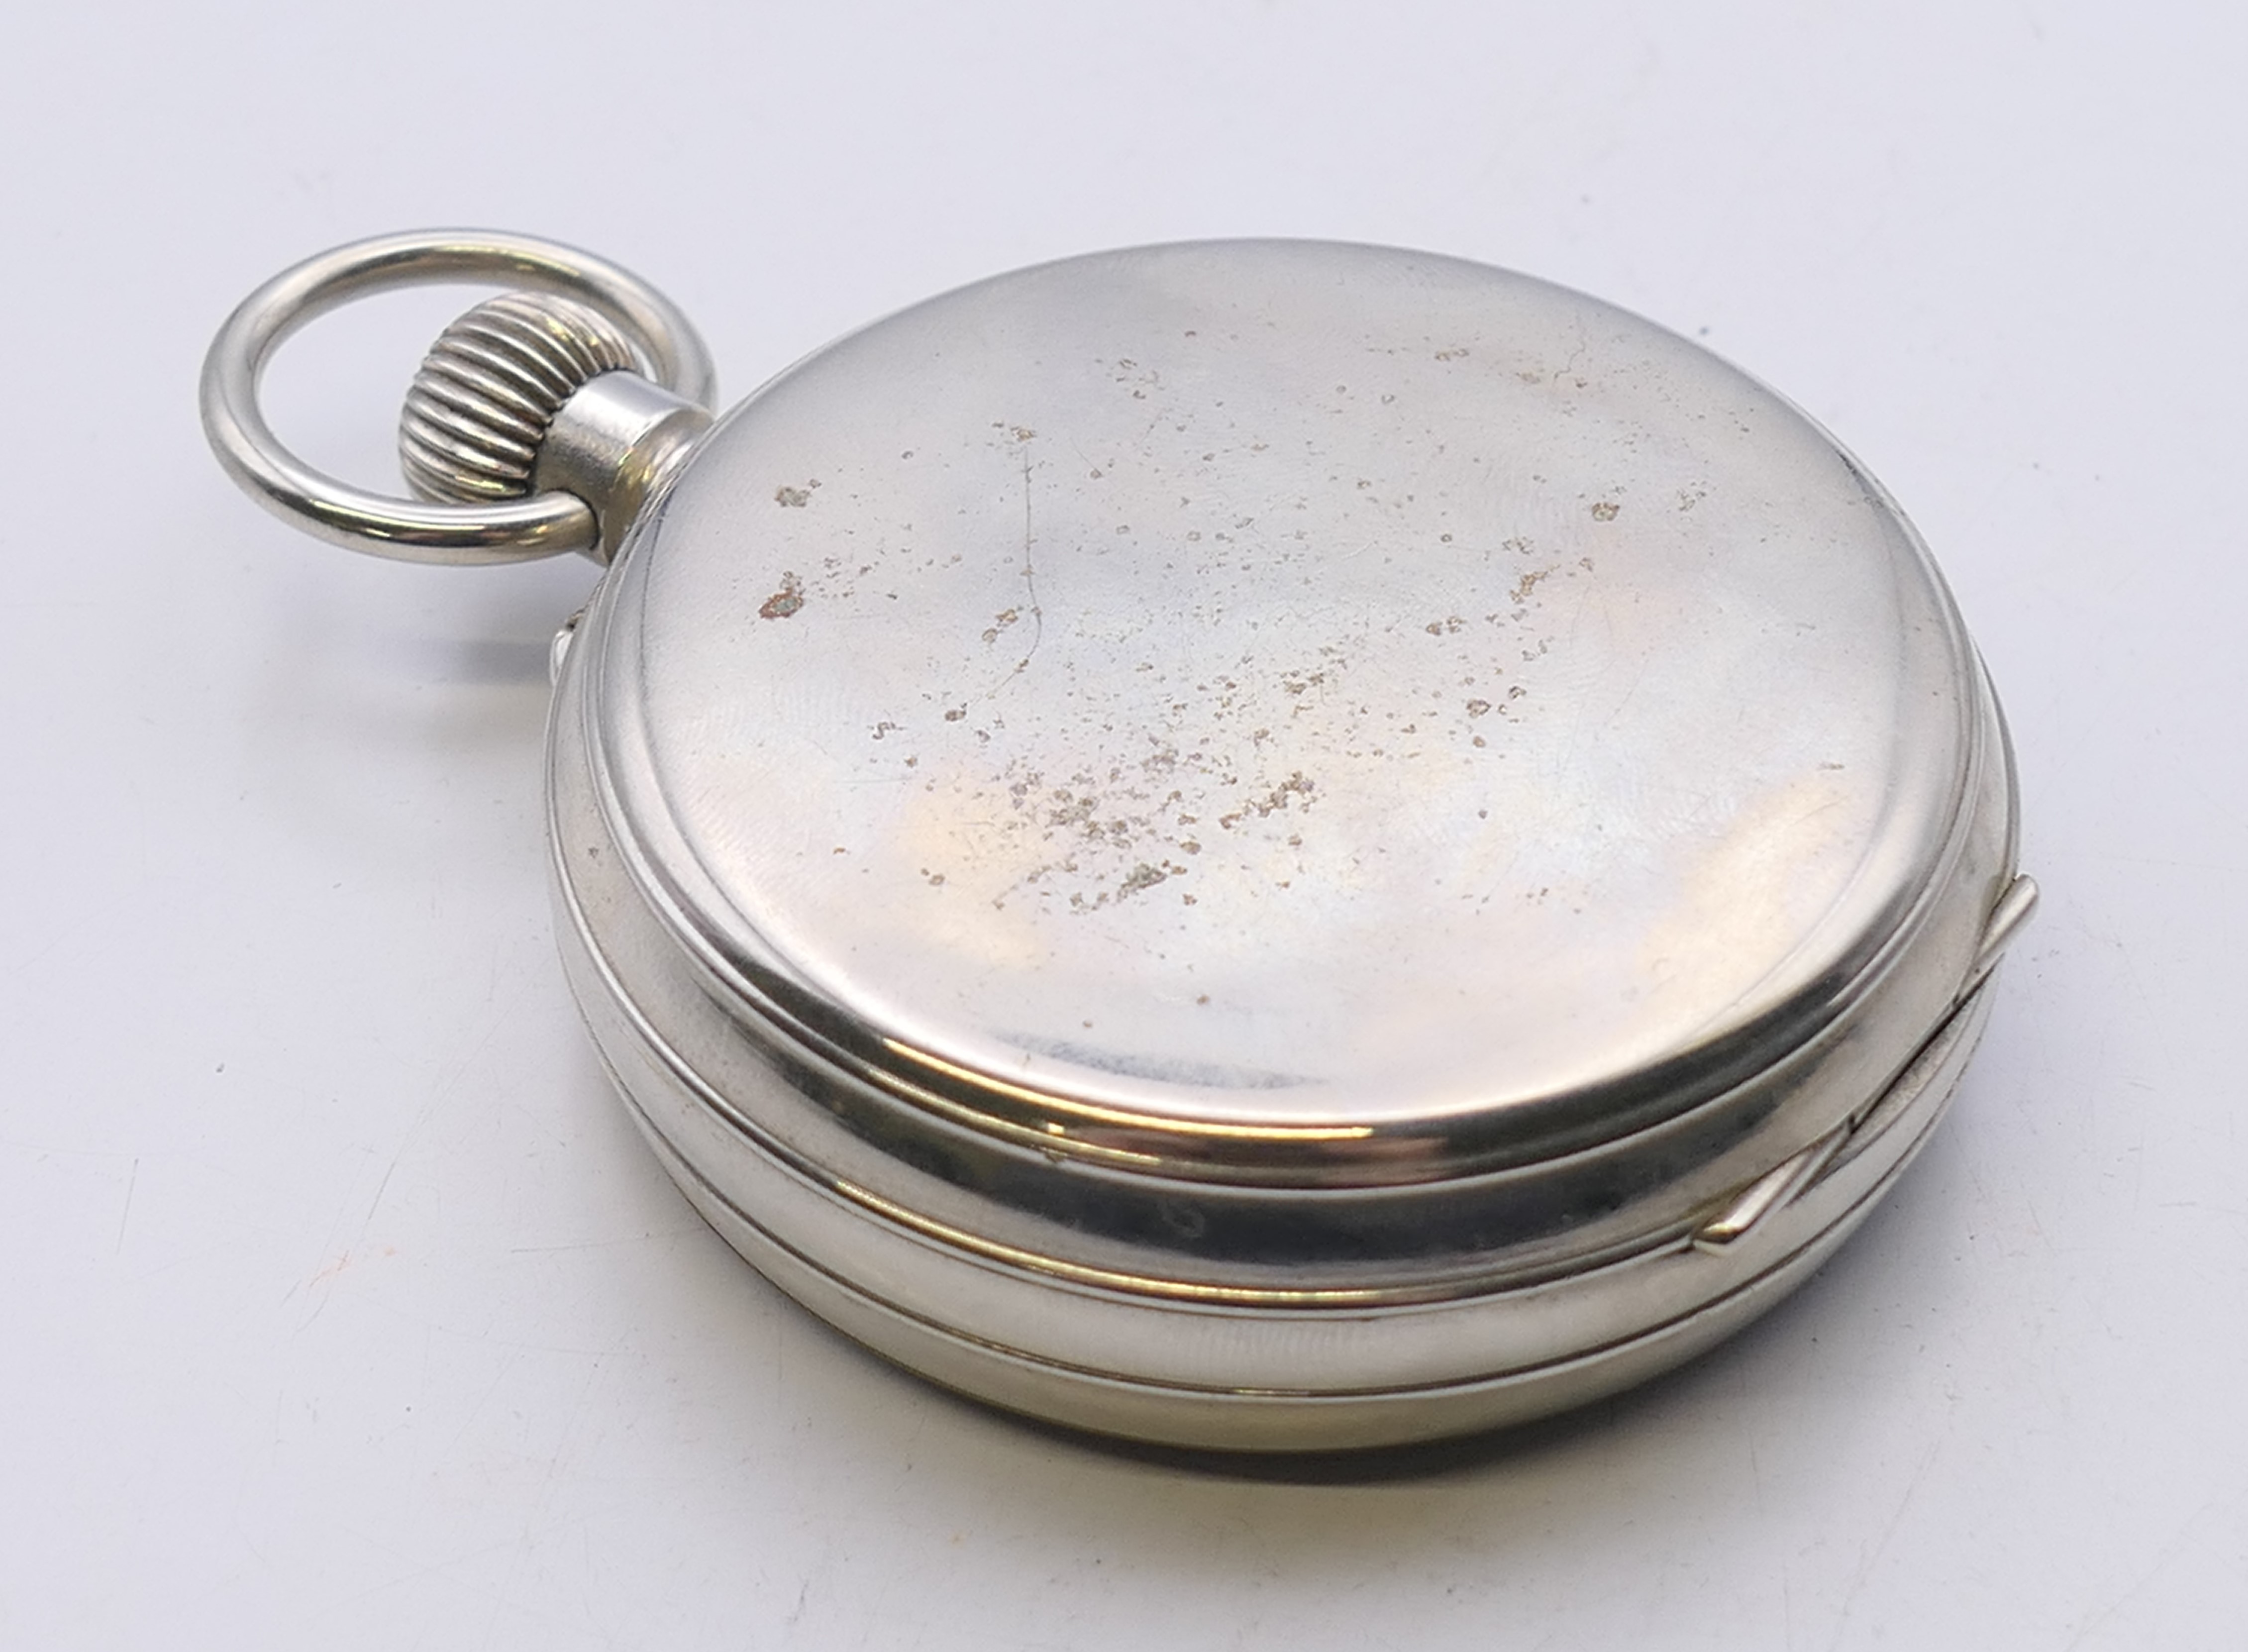 A Swiss silver plated Goliath pocket watch, housed in a silver-clad travelling case. - Image 9 of 9